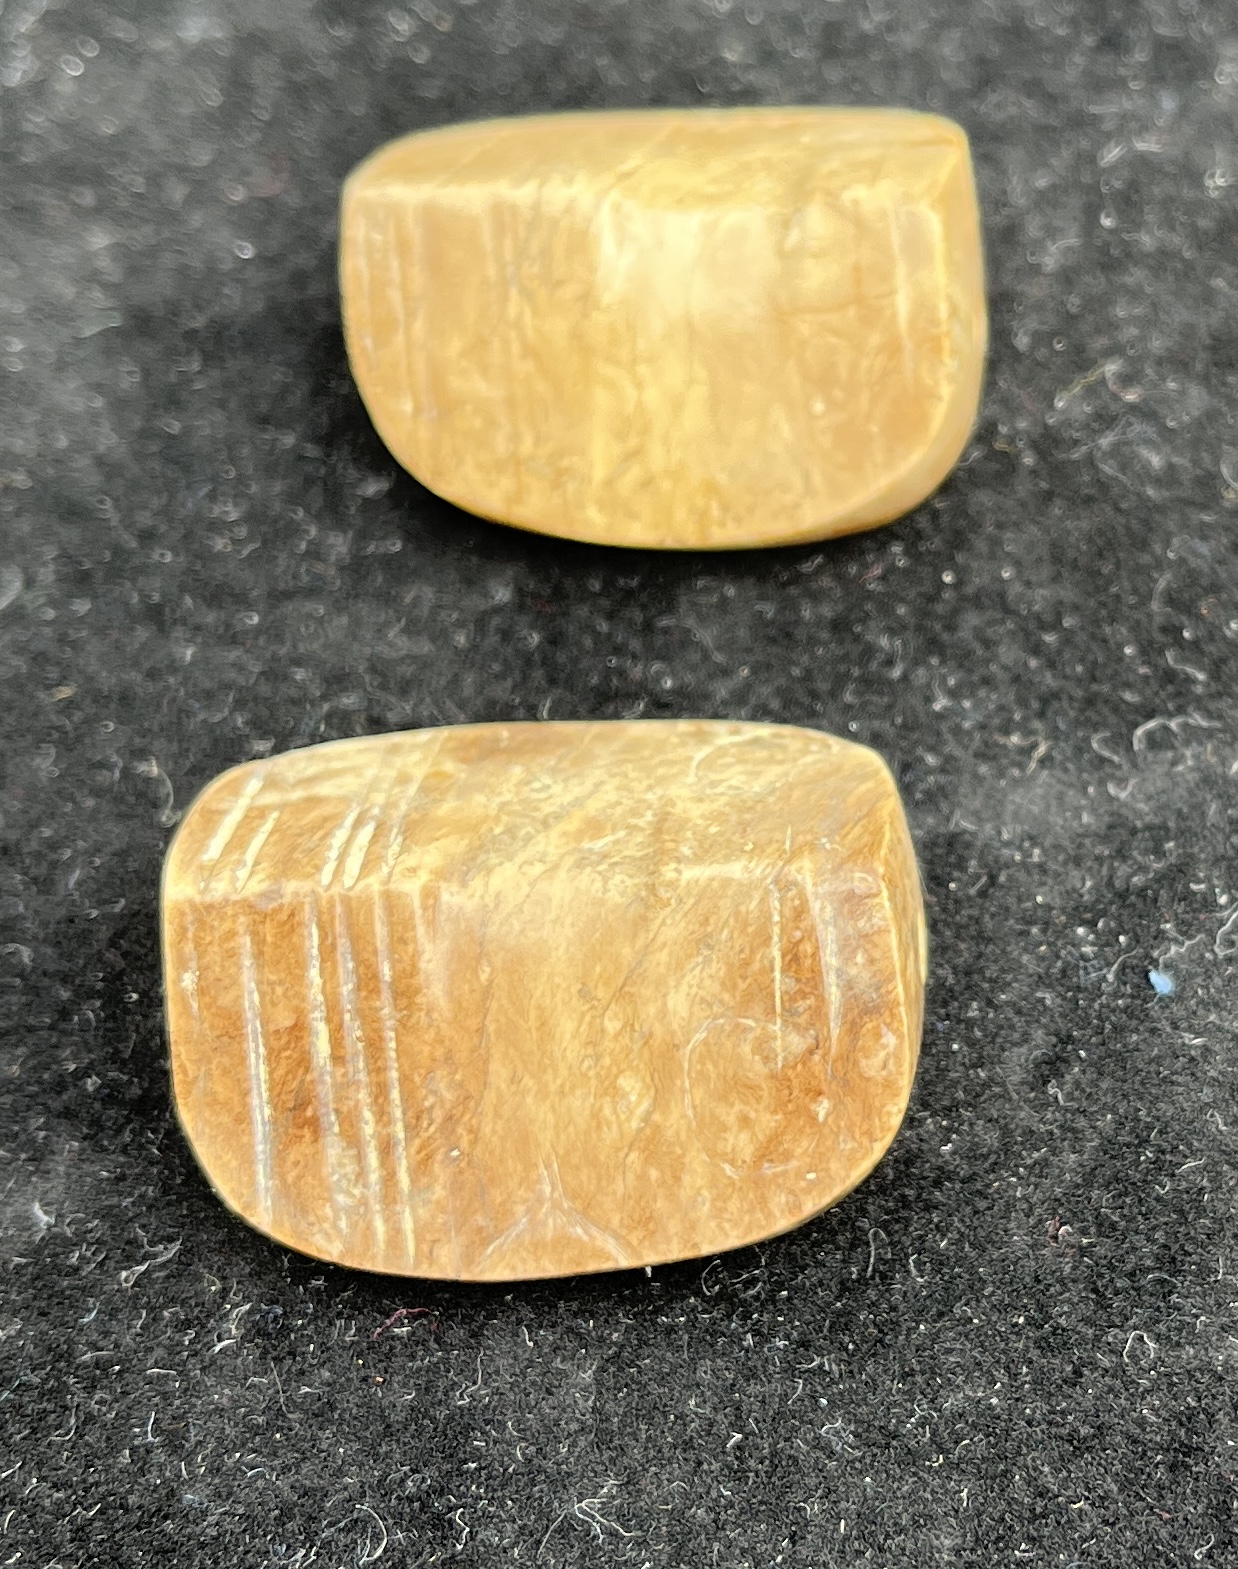 TWO CHINESE JADE CONG PENDANT FRAGMENTS, LIANGZHU CULTURE, 3300 – 2300 BC - Image 4 of 7